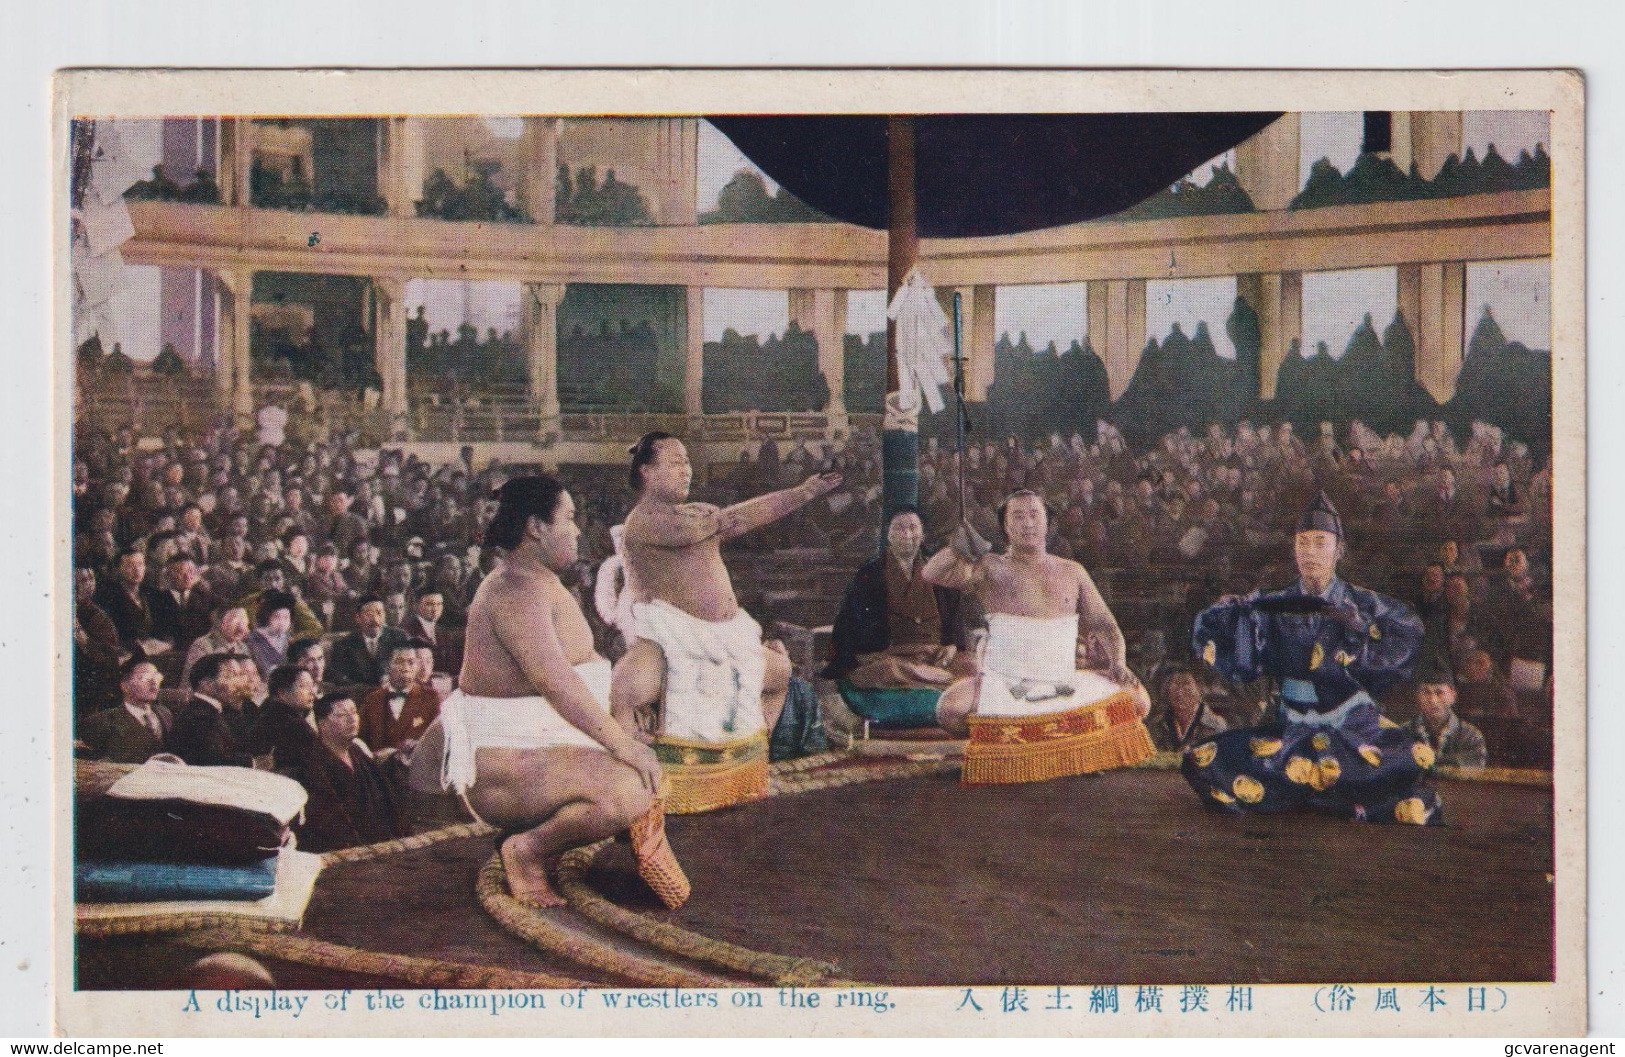 SUMO  YOKOZUMA   1912  A DISPLAY OF THE CHAMPION OF WRESLERS ON THE RING - Martiaux